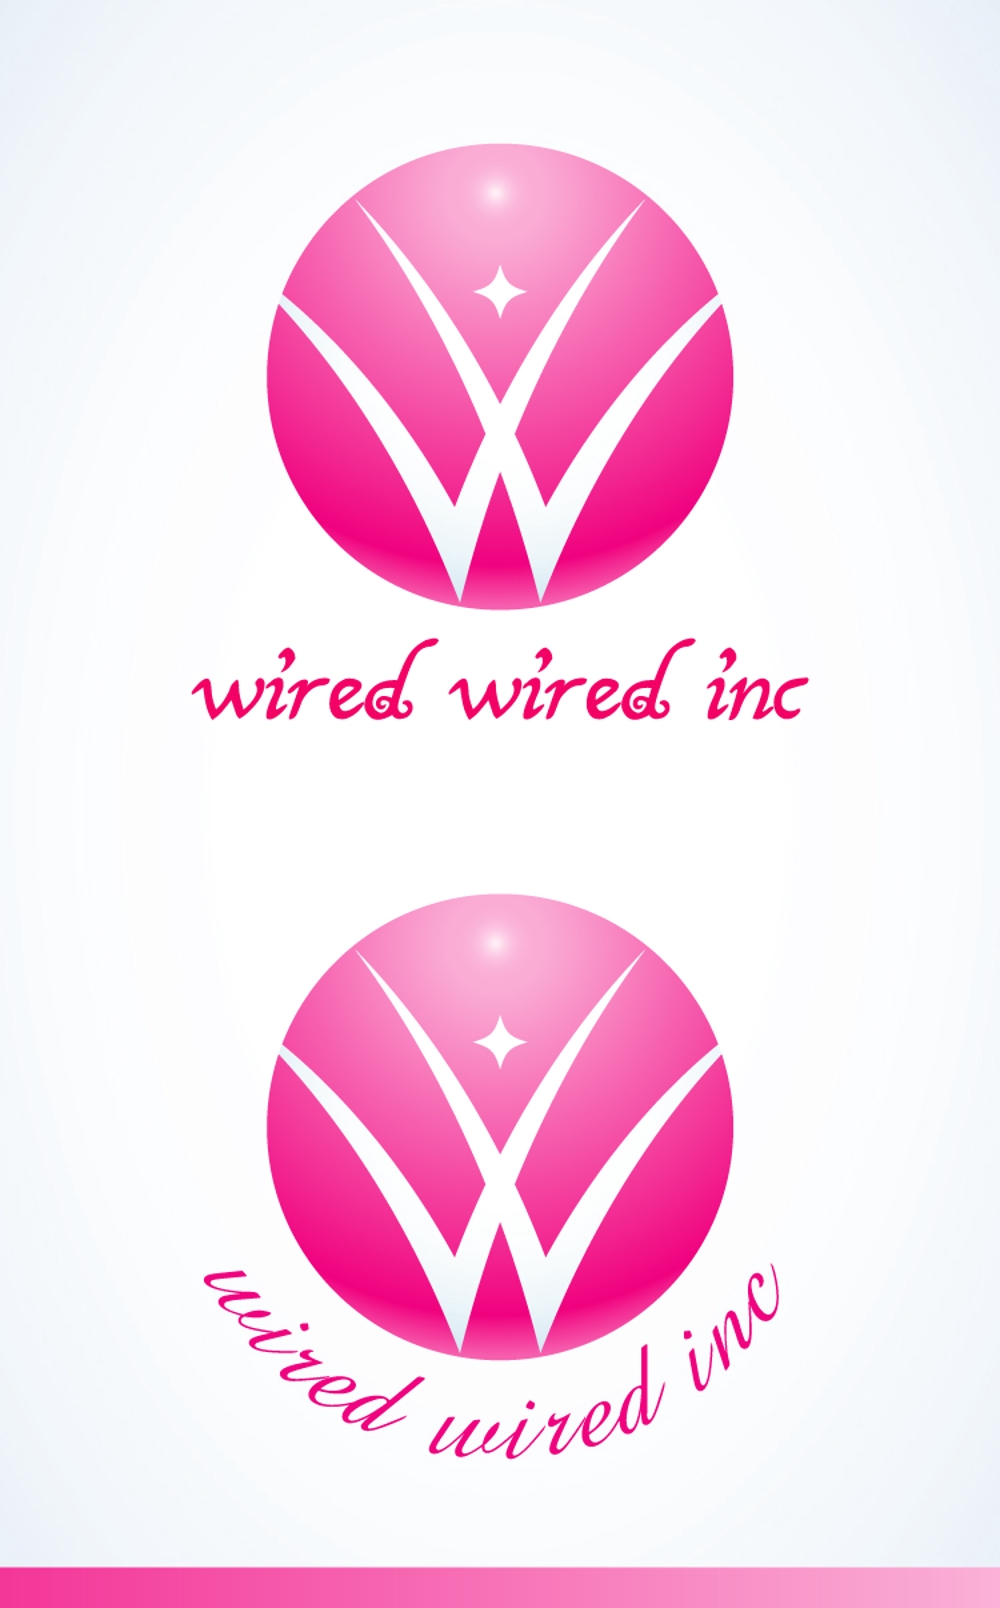 wired wired inc.jpg